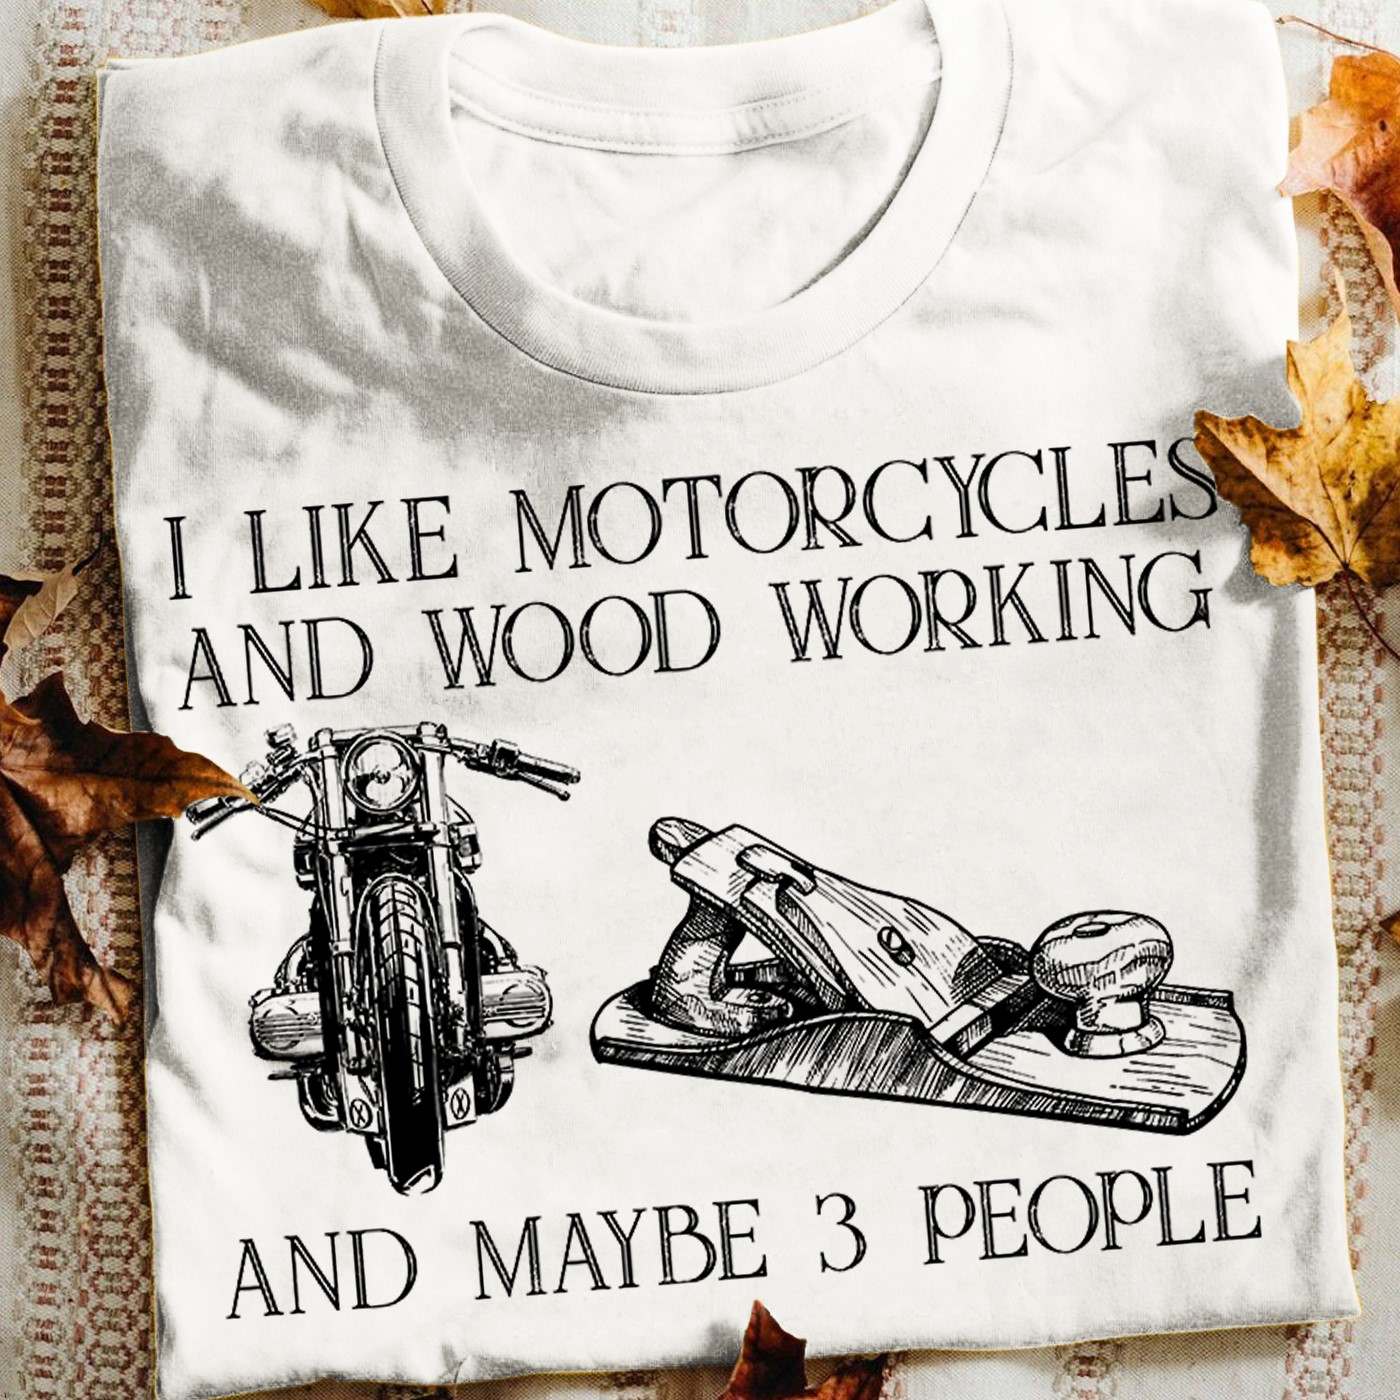 I like motorcycles and wood working and maybe 3 people - Wood worker